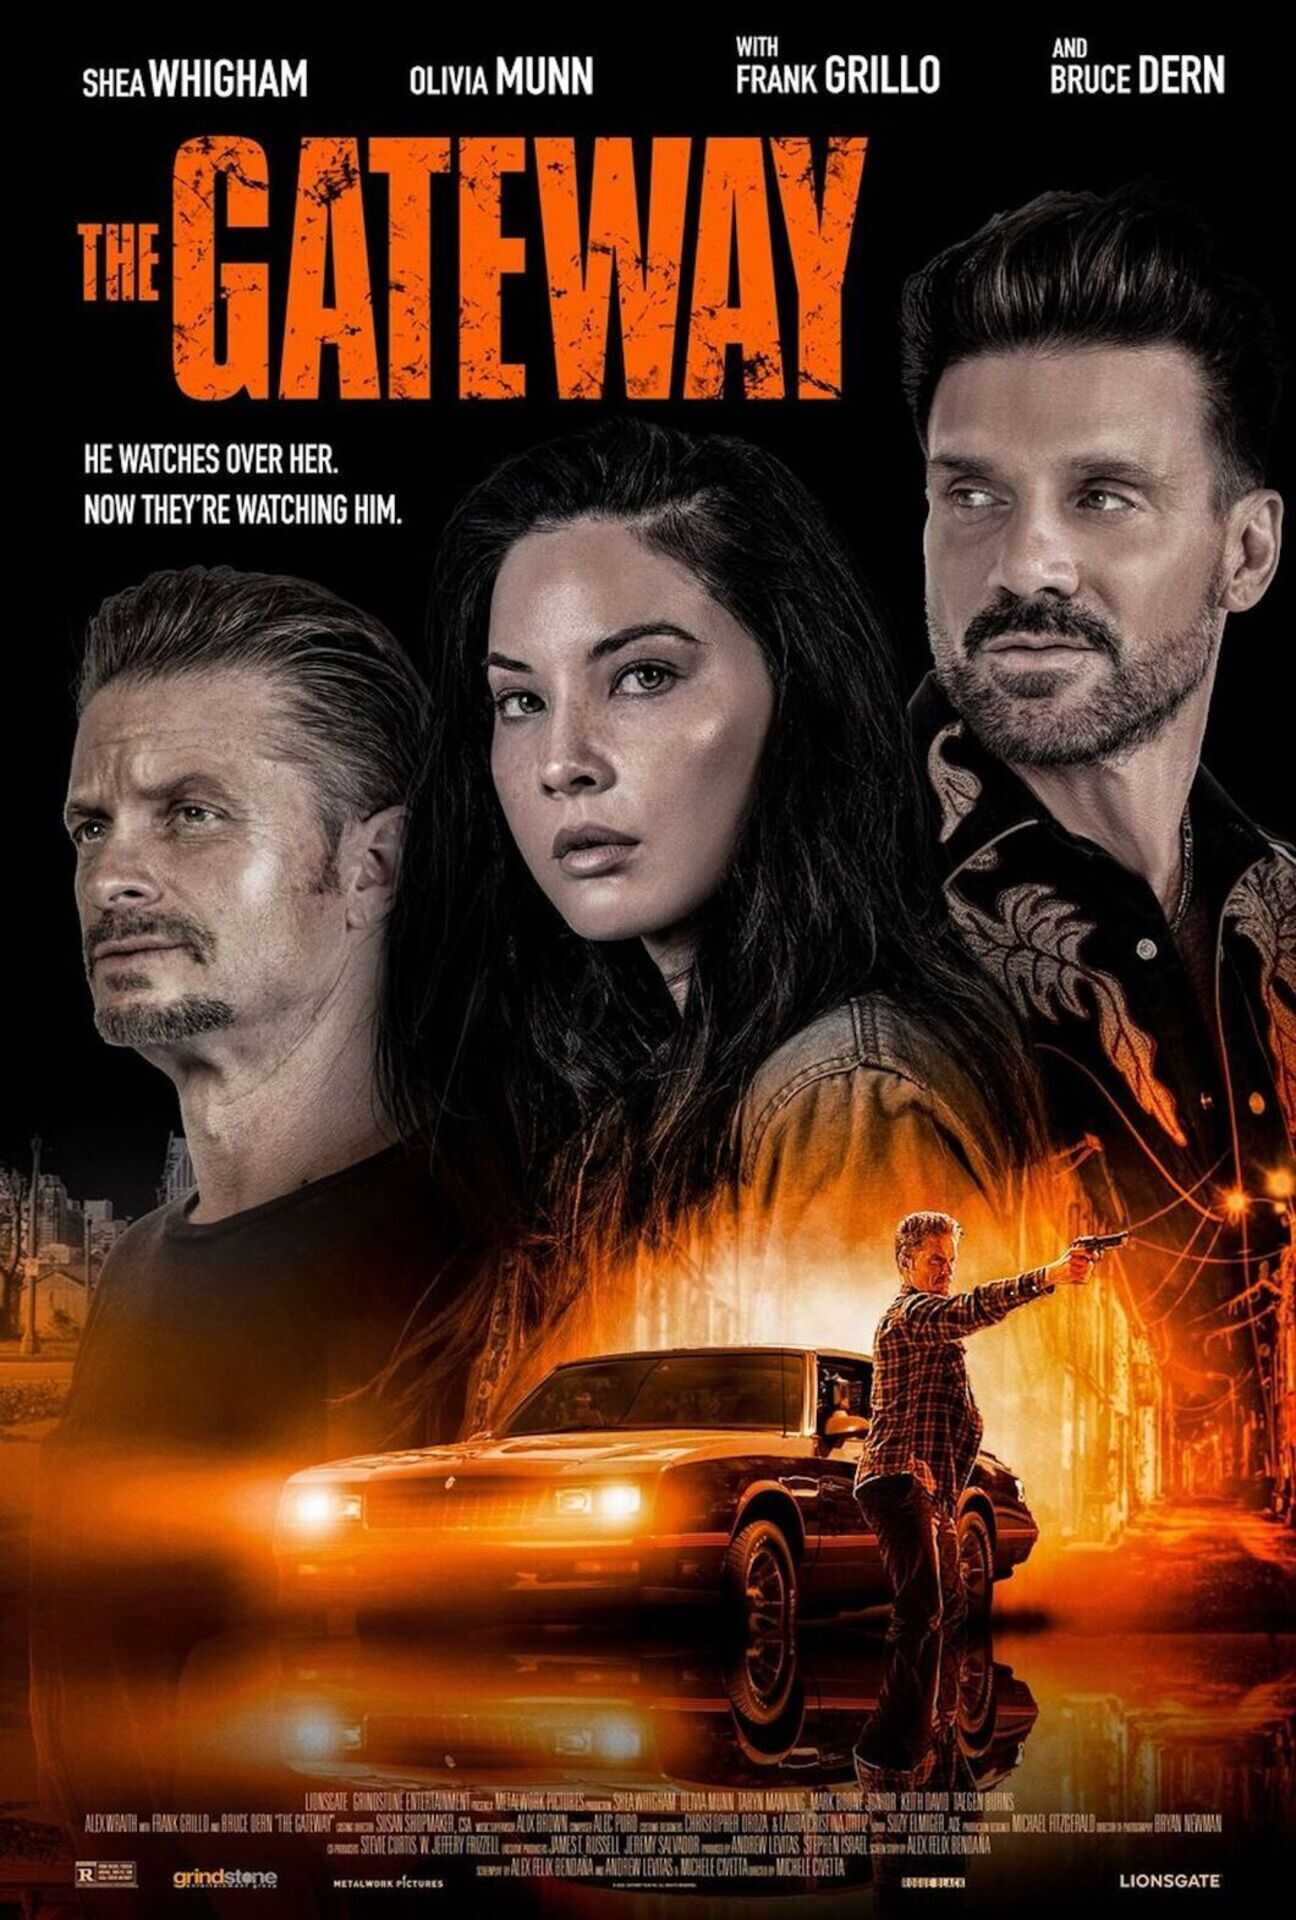 Theatrical poster for The Gateway (2021), directed by Michele Civetta.